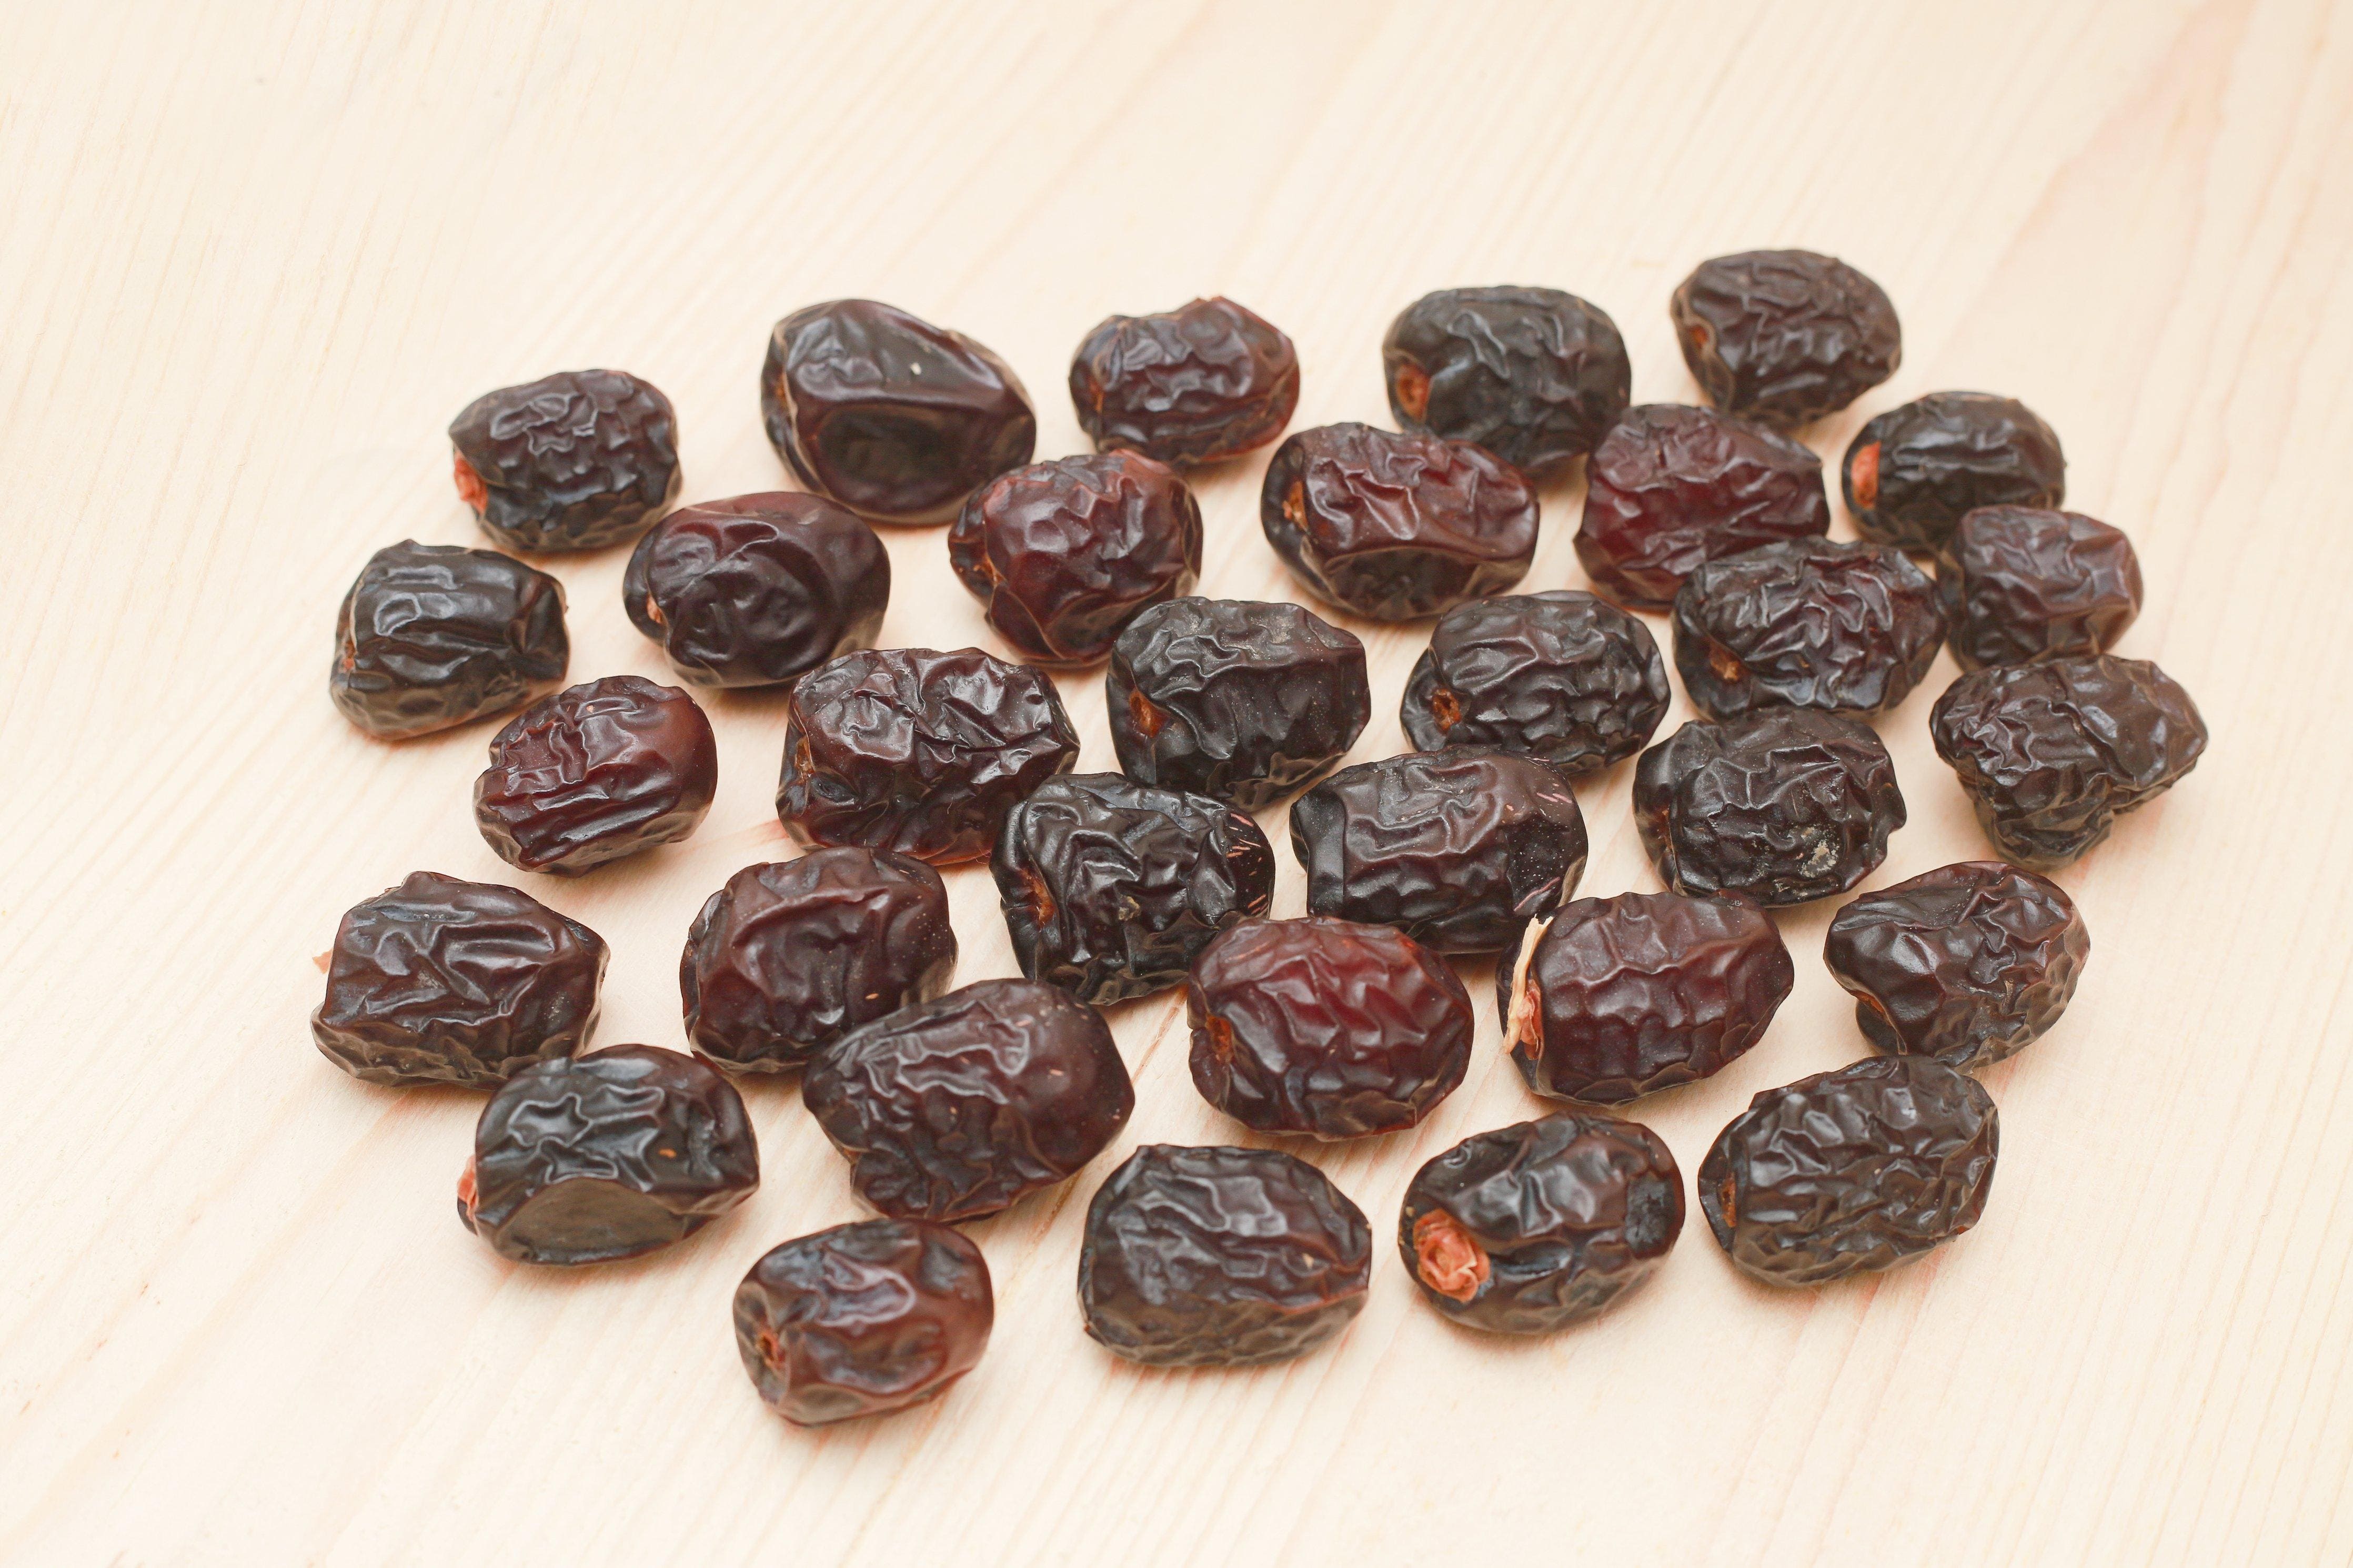 Buy-quality-dates-online